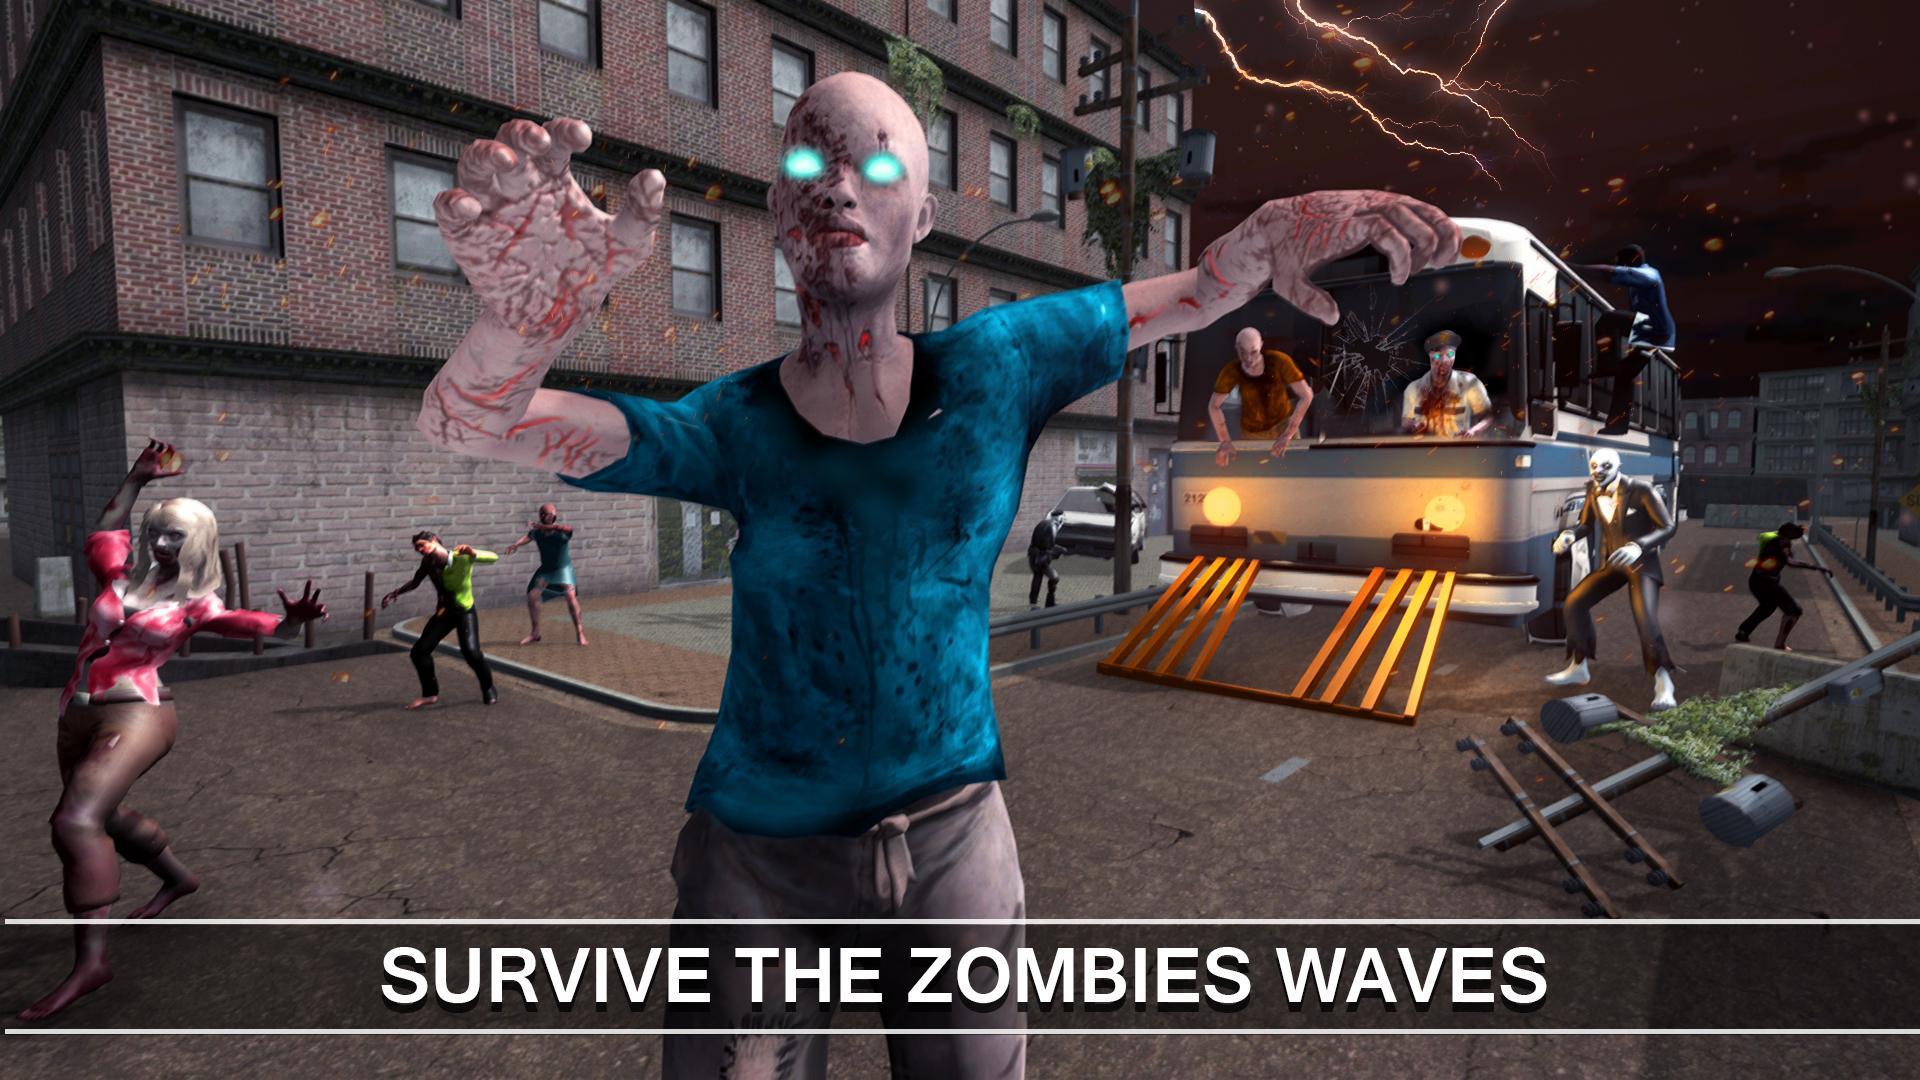 Zombie Hunter Battleground Survival Offline Fps For Android - roblox build to survive the zombies